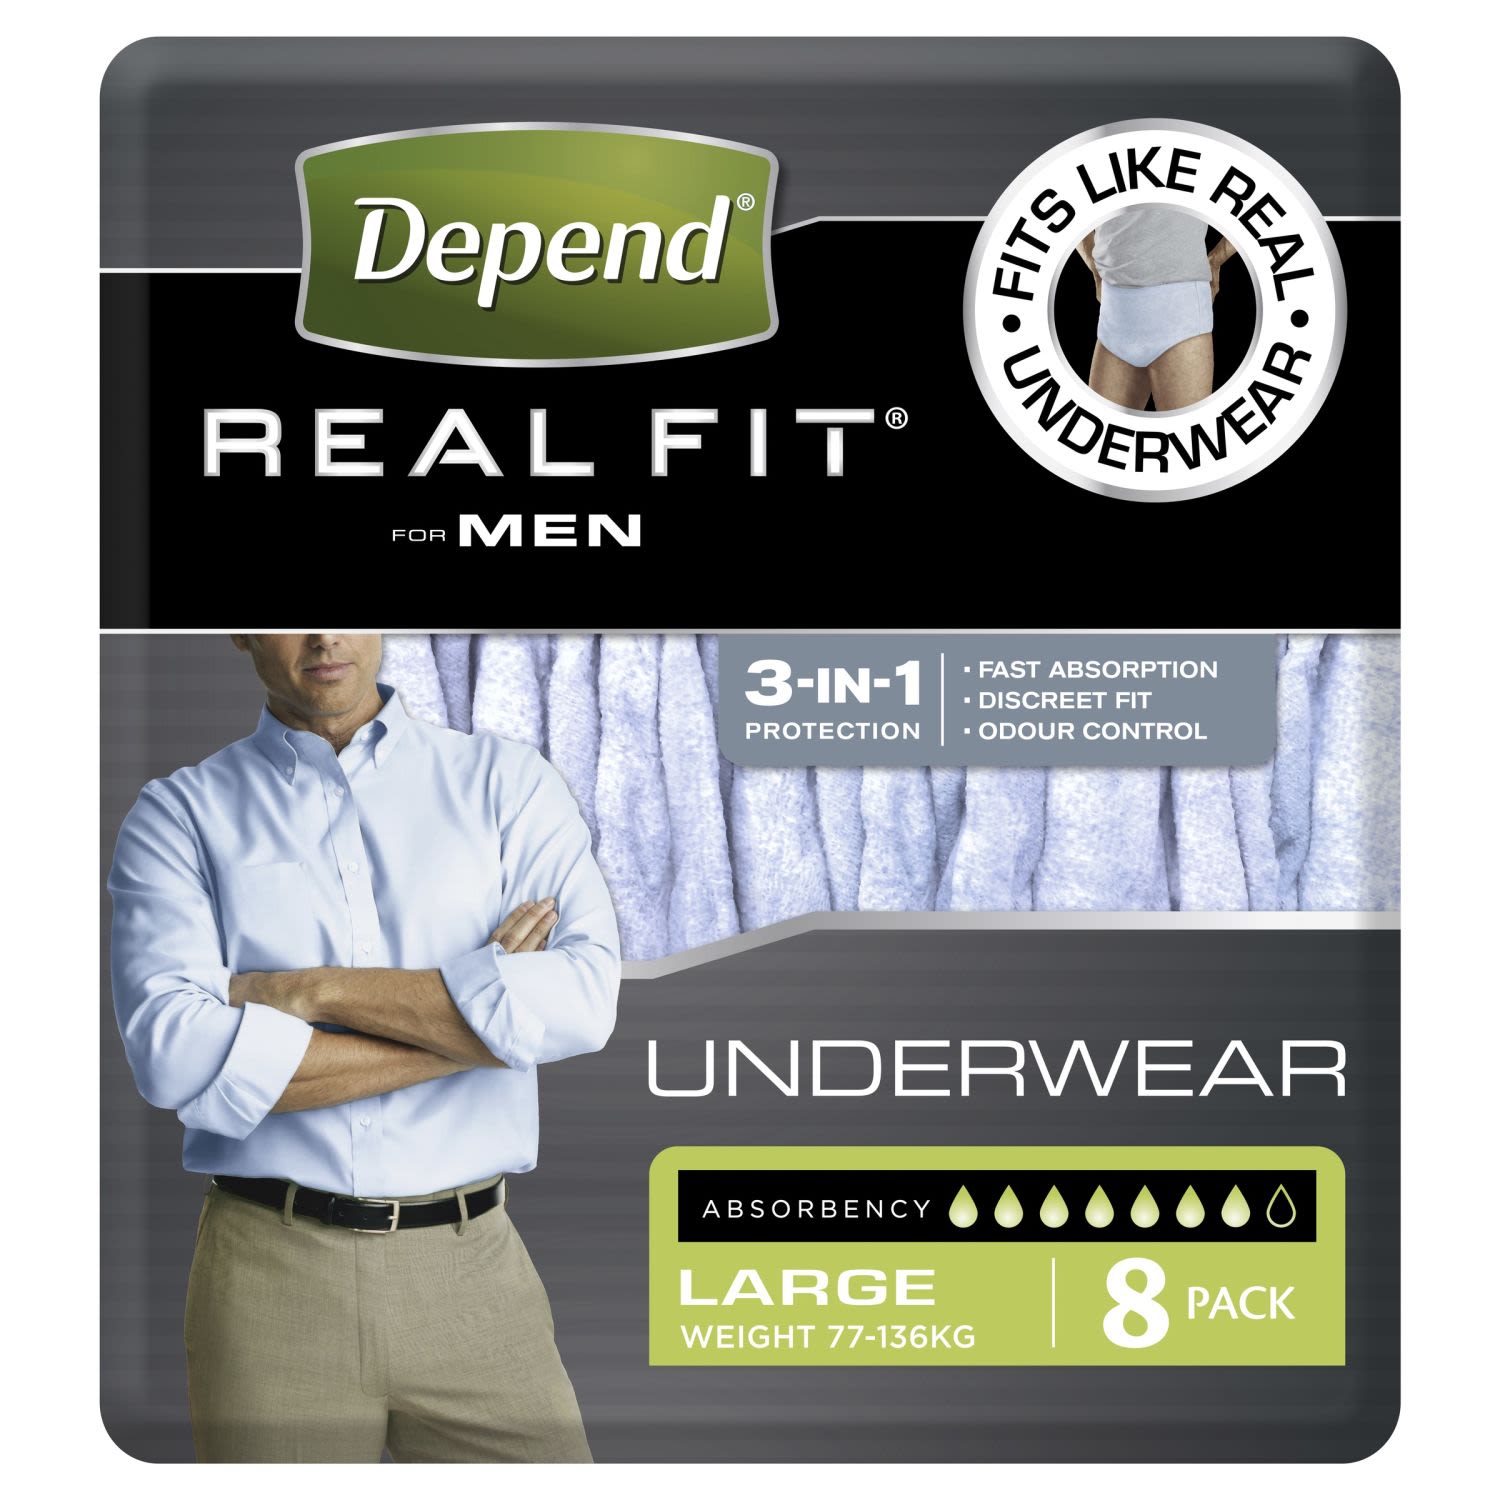 Depend Real Fit For Men Underwear Large, 8 Each